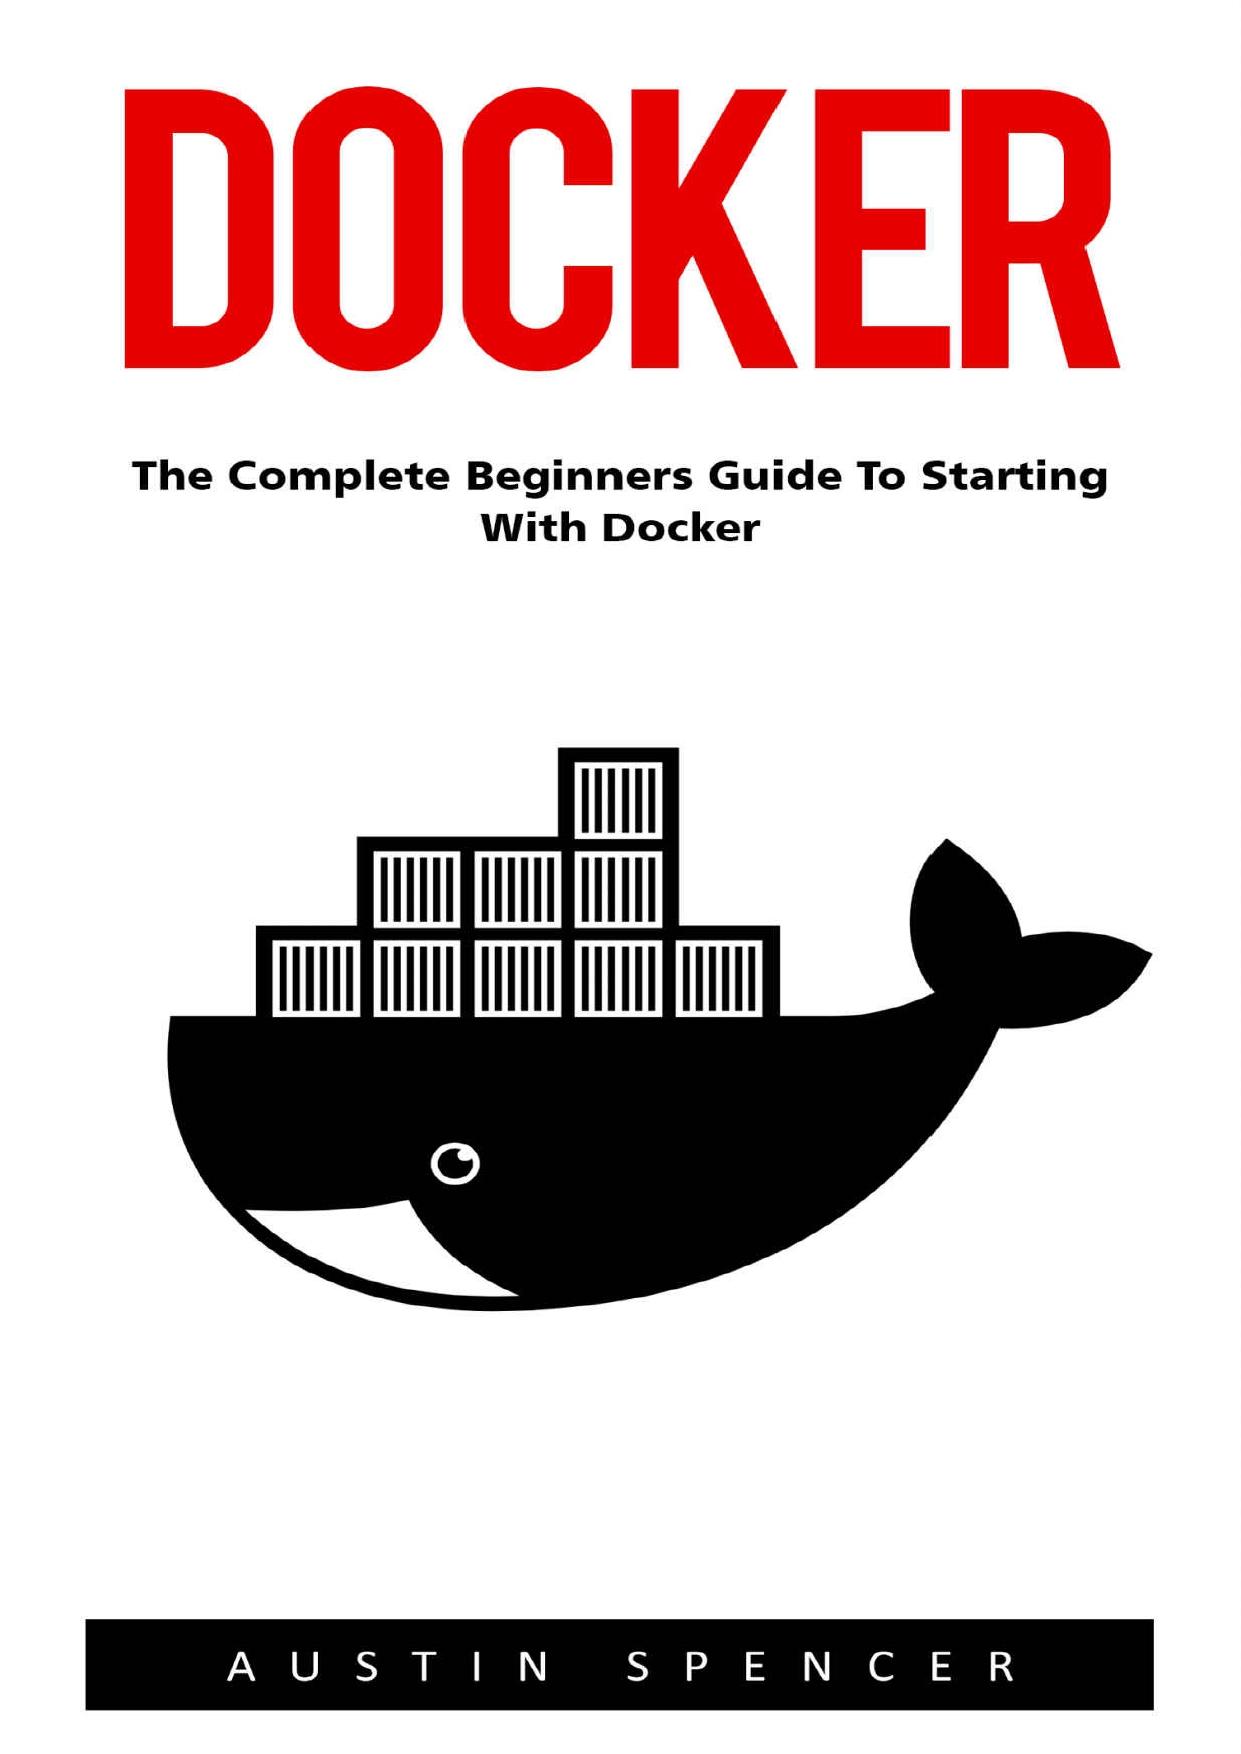 Docker: The Complete Beginners Guide to Starting with Docker (Programming, Docker Containers, Linking Containers)